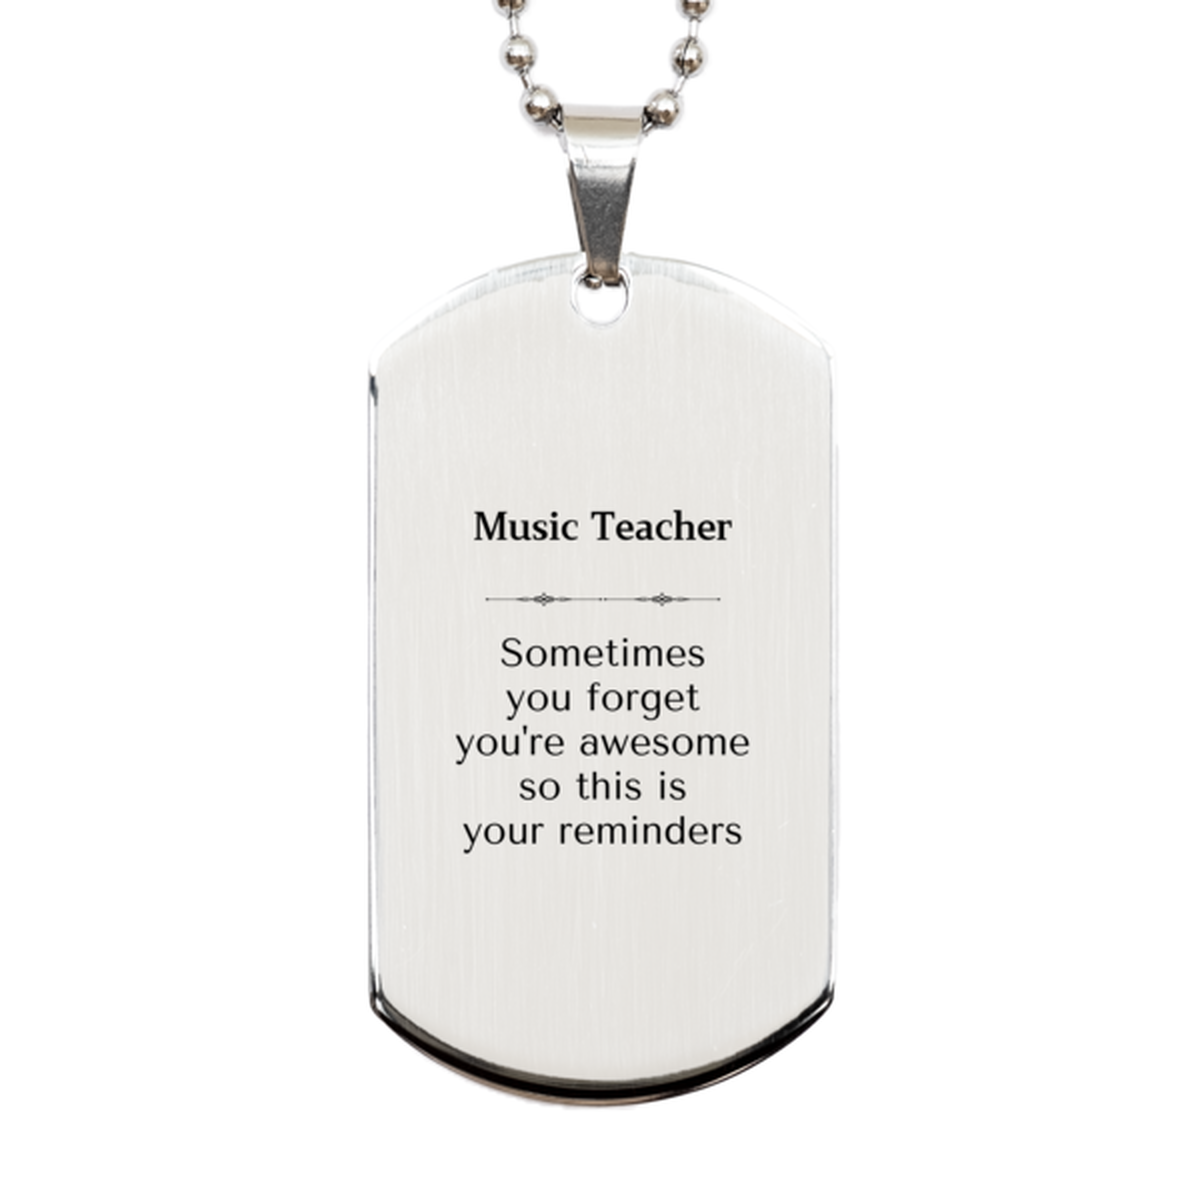 Sentimental Music Teacher Silver Dog Tag, Music Teacher Sometimes you forget you're awesome so this is your reminders, Graduation Christmas Birthday Gifts for Music Teacher, Men, Women, Coworkers